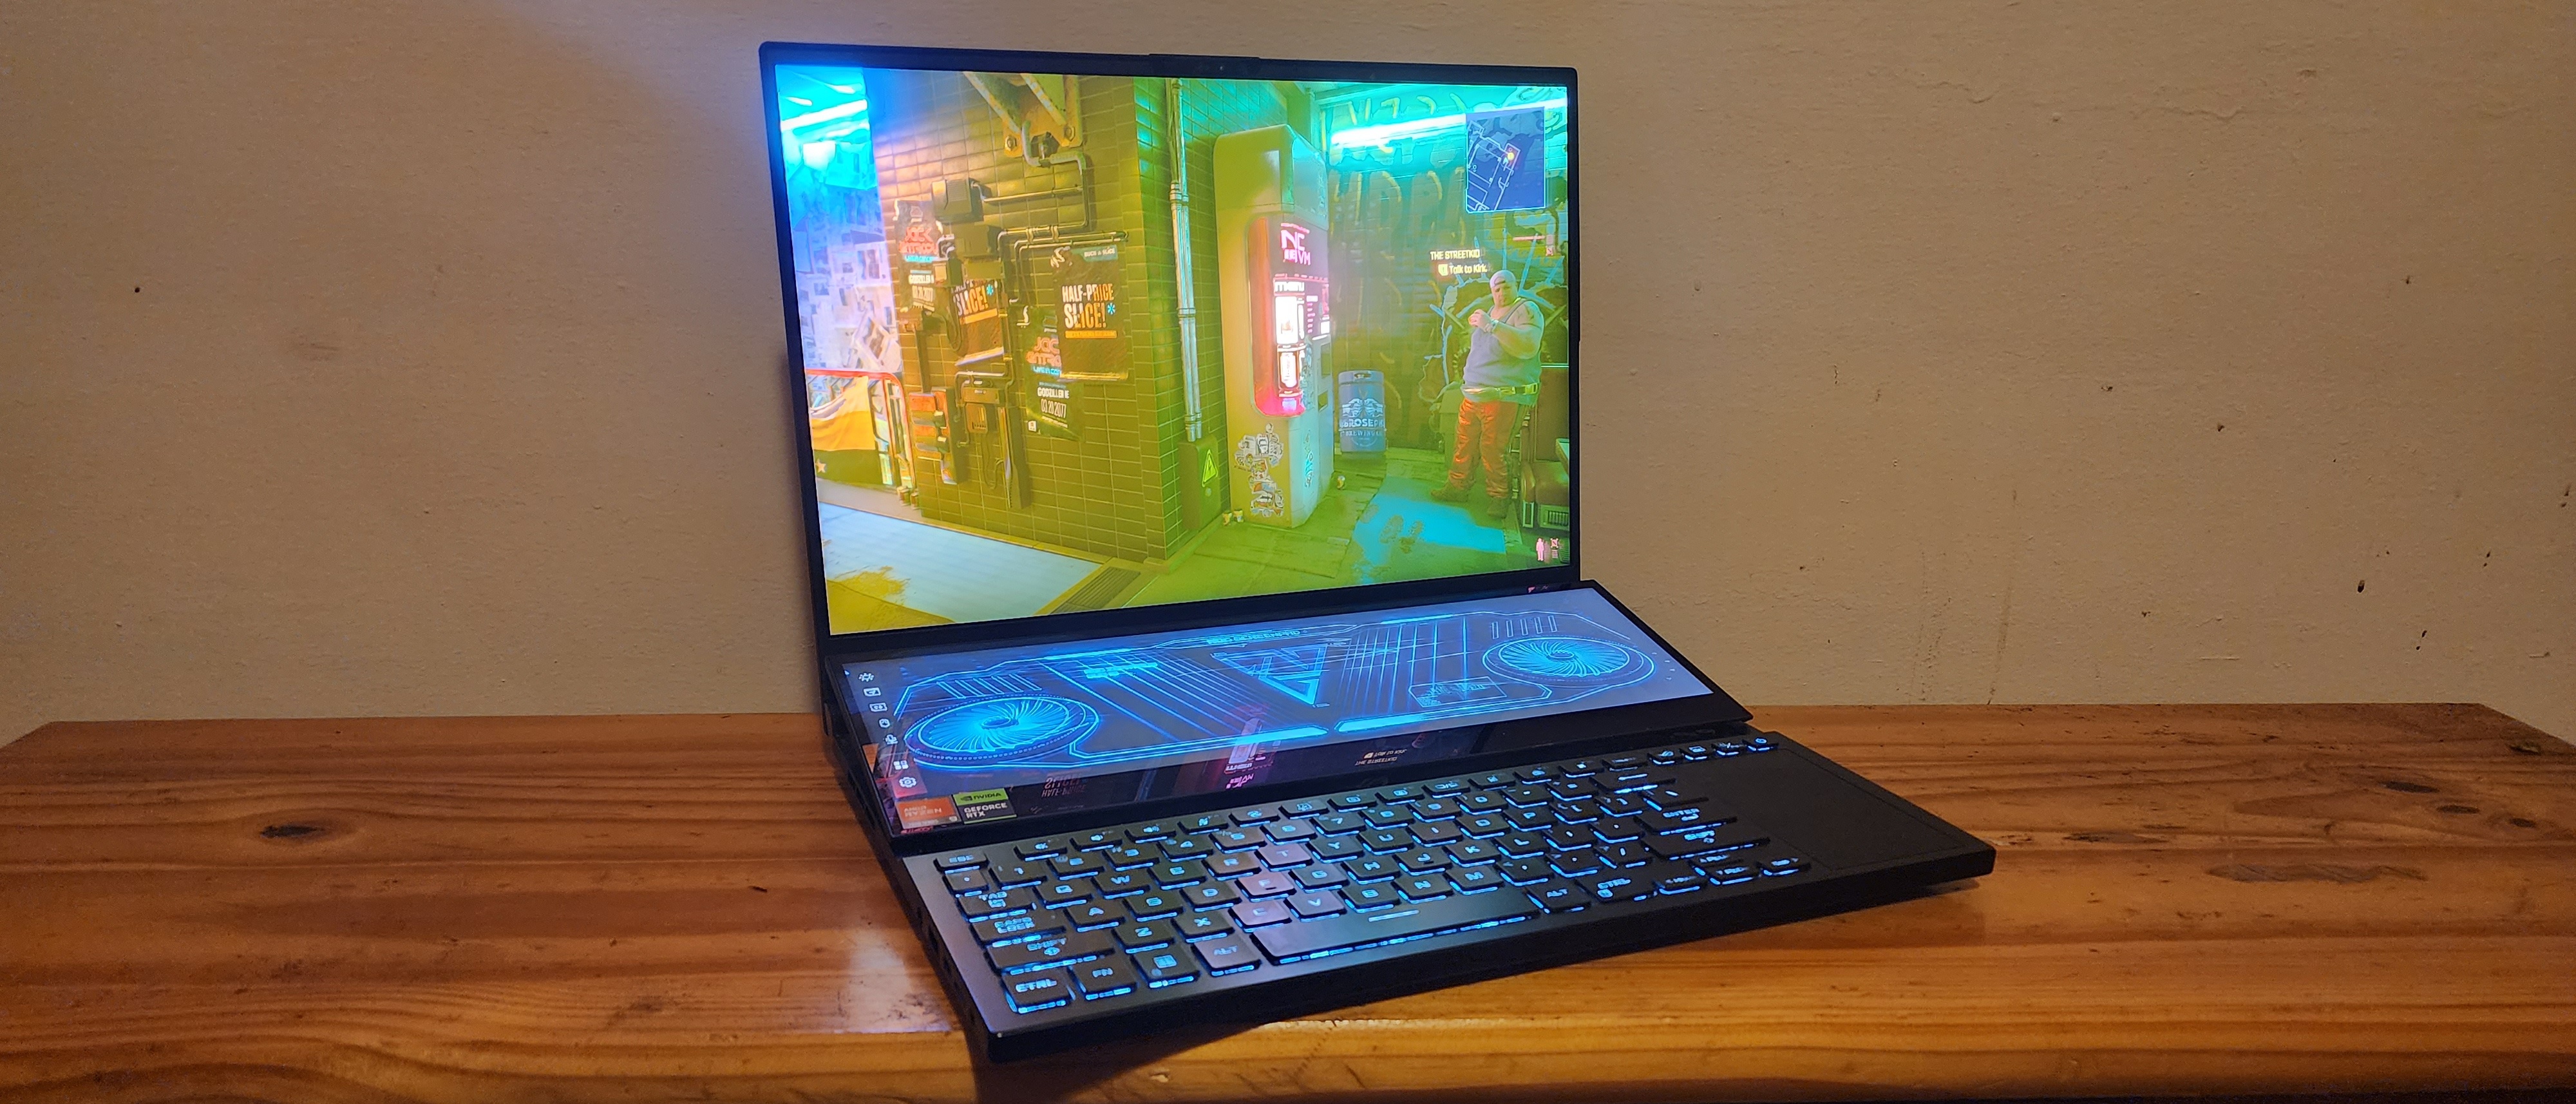 ASUS ROG Delta S review: A powerhouse that punches above its